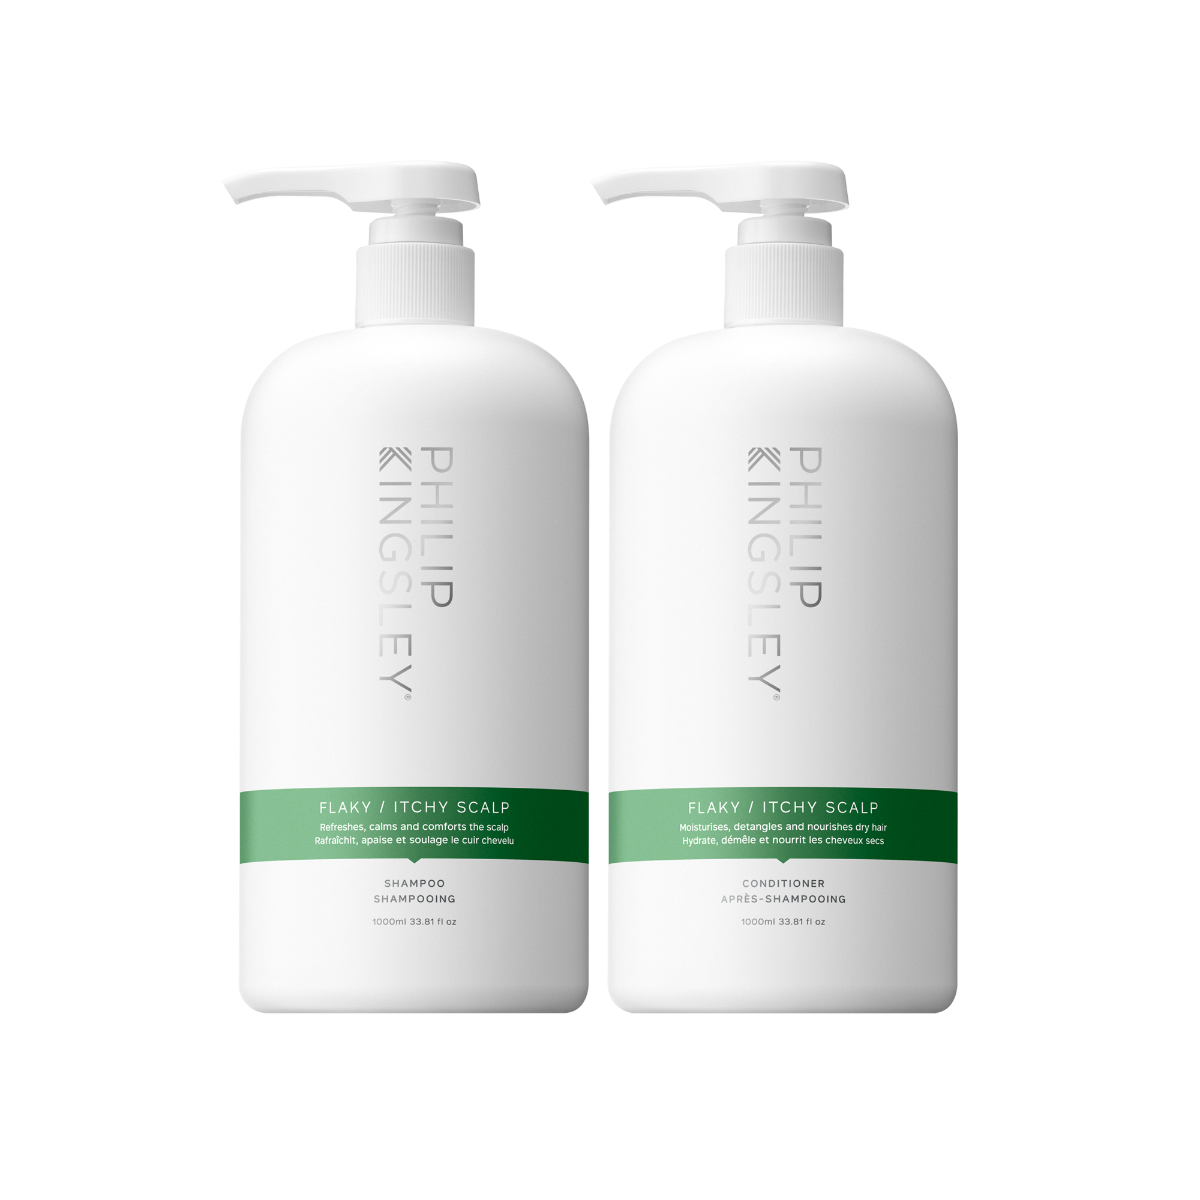 Flaky/Itchy Scalp Anti-Dandruff Shampoo & Flaky/Itchy Hydrating Conditioner Supersize Duo